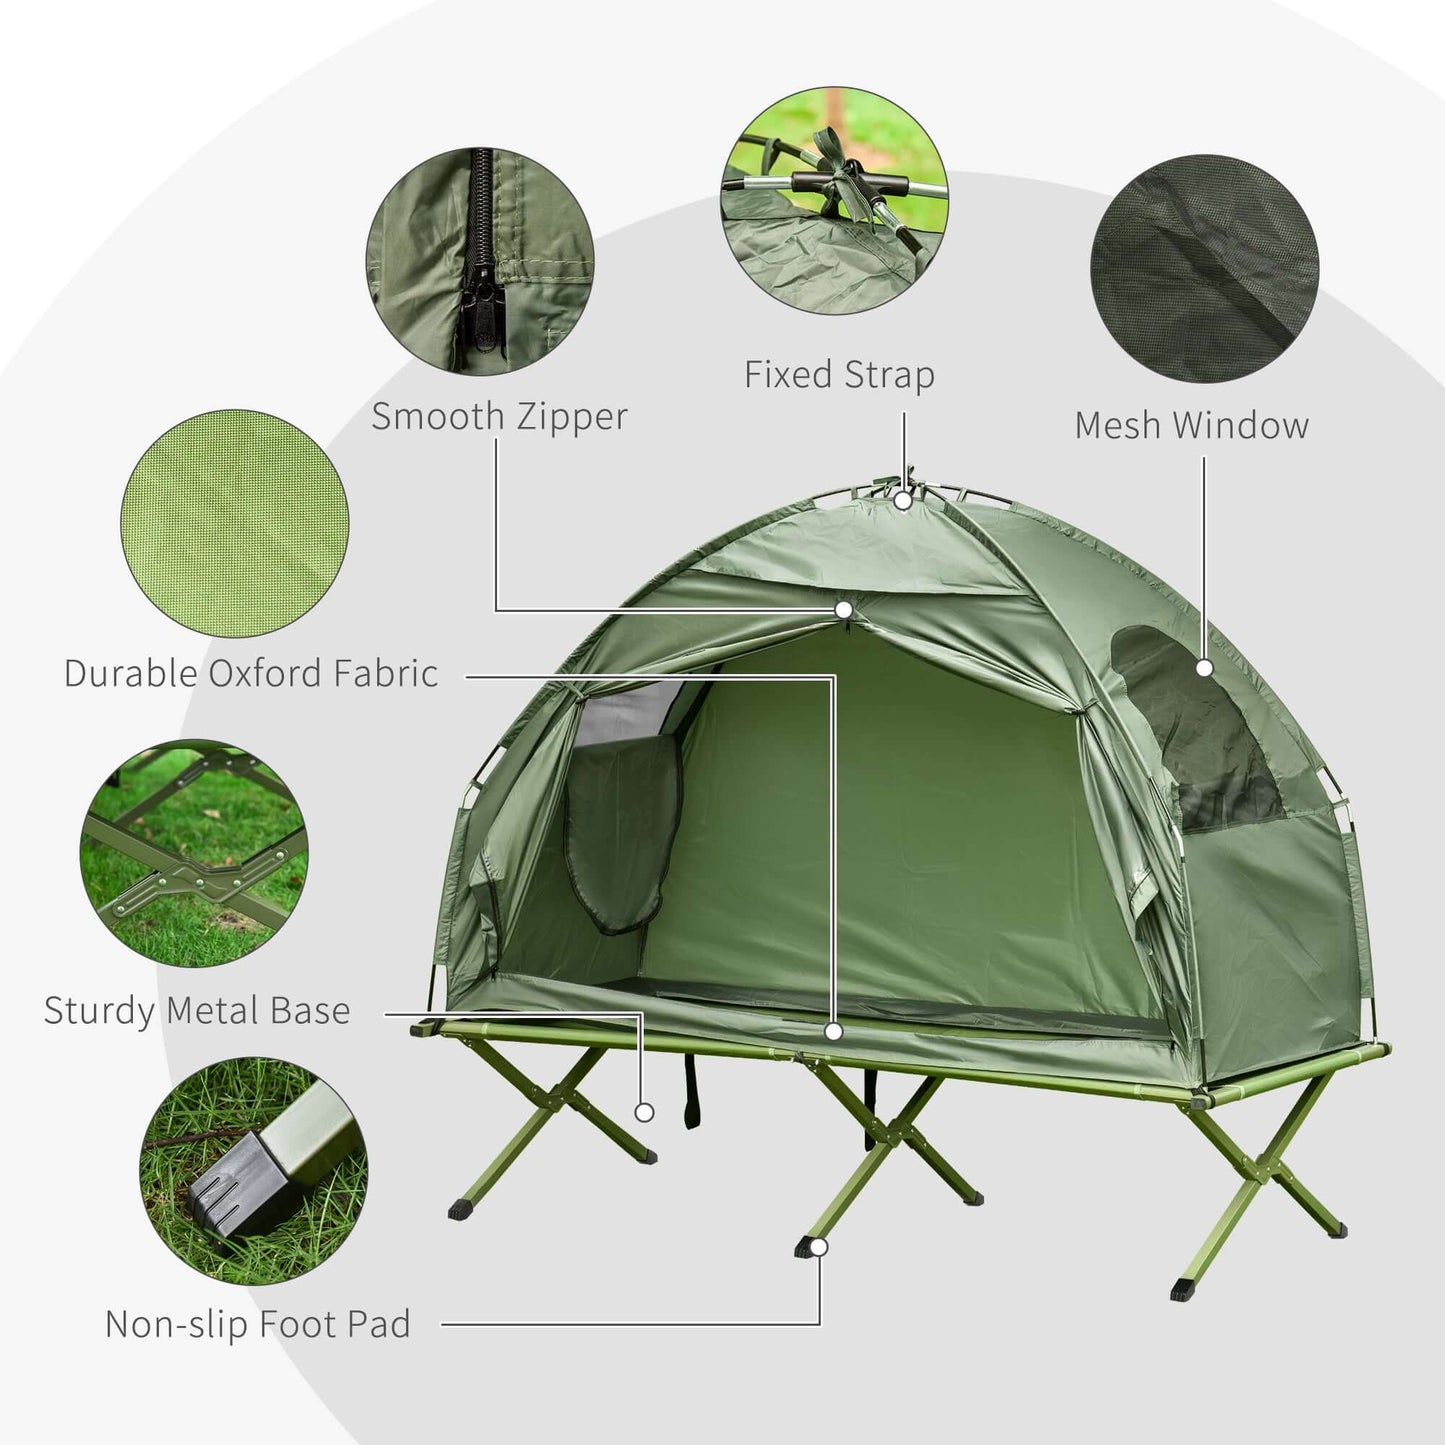 Outdoor and Garden-1 Person Folding Camping Cot, Portable Outdoor with Carry Bag, 2-in-1 Elevated Camping Bed Tent Single - Outdoor Style Company